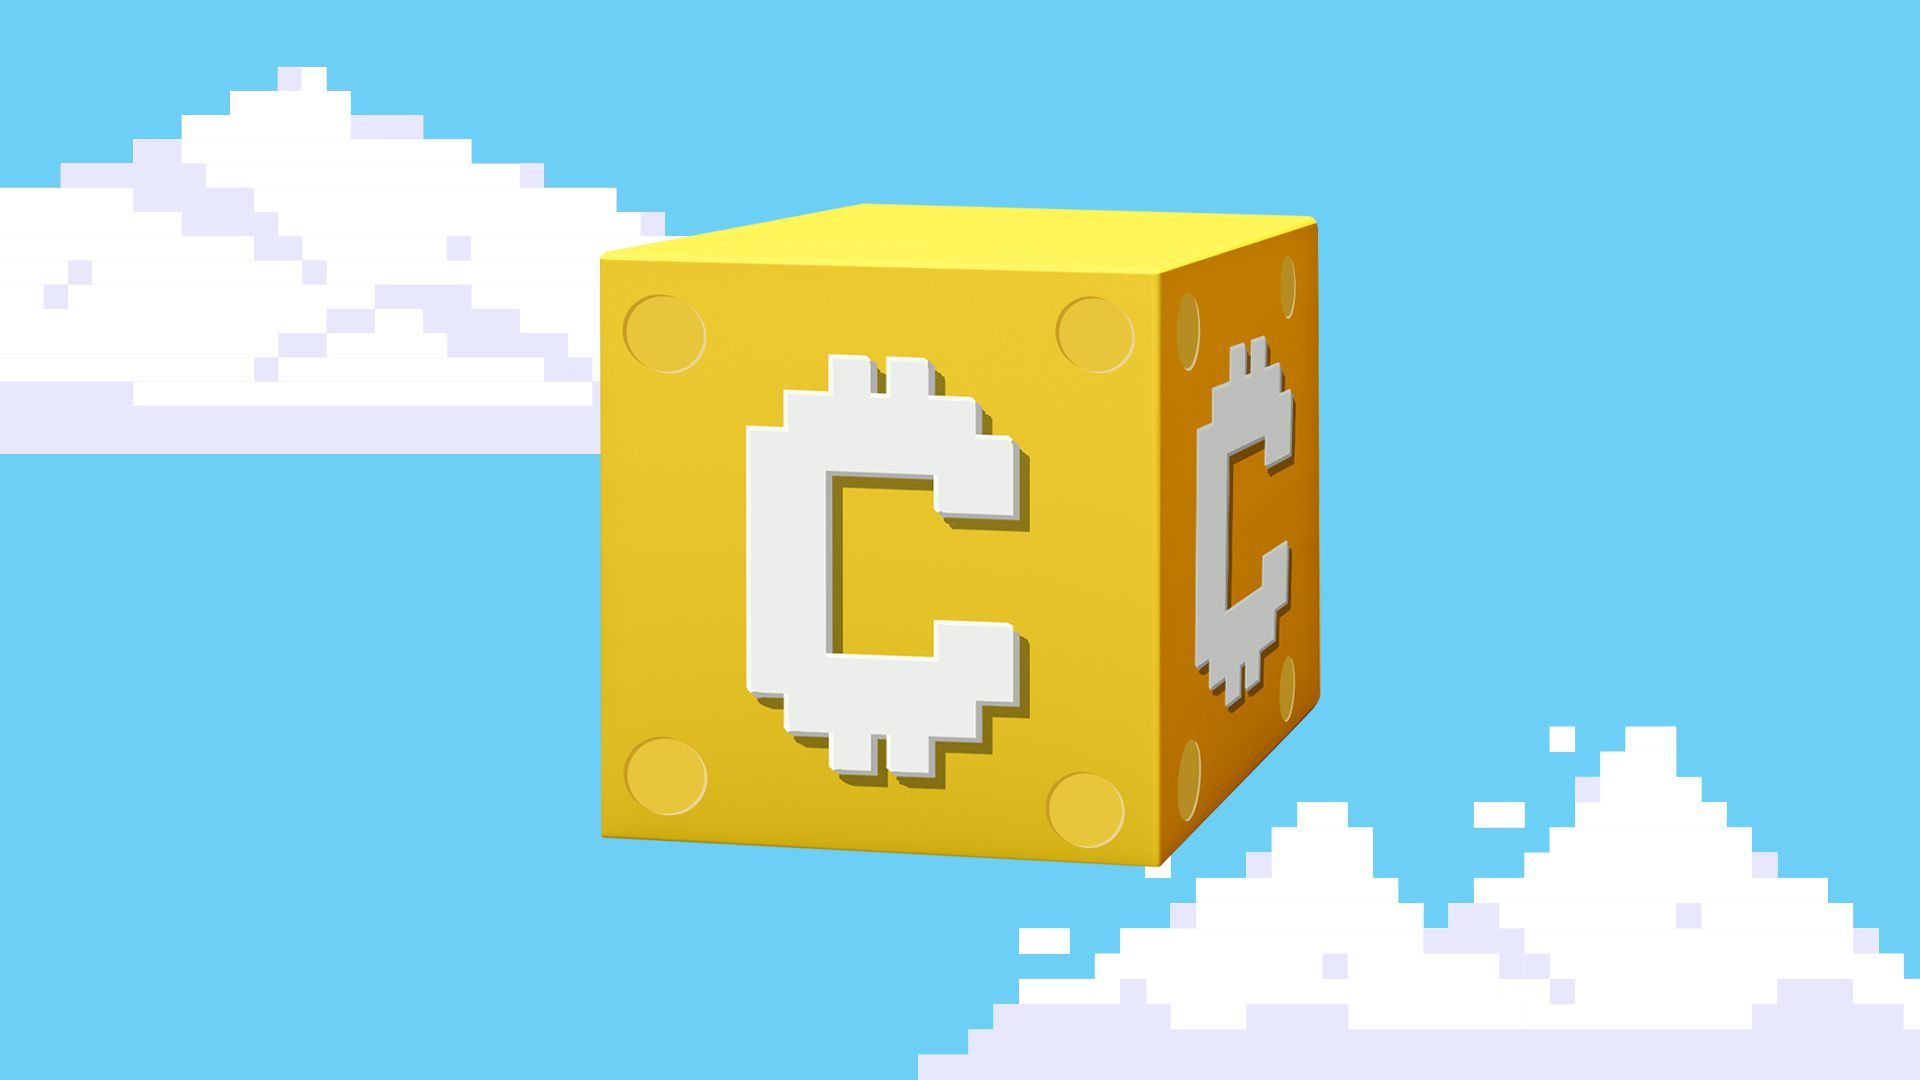 Illustration of a Mario-style coin box with a crypto currency symbol instead of a question mark surrounded by pixelated clouds.  